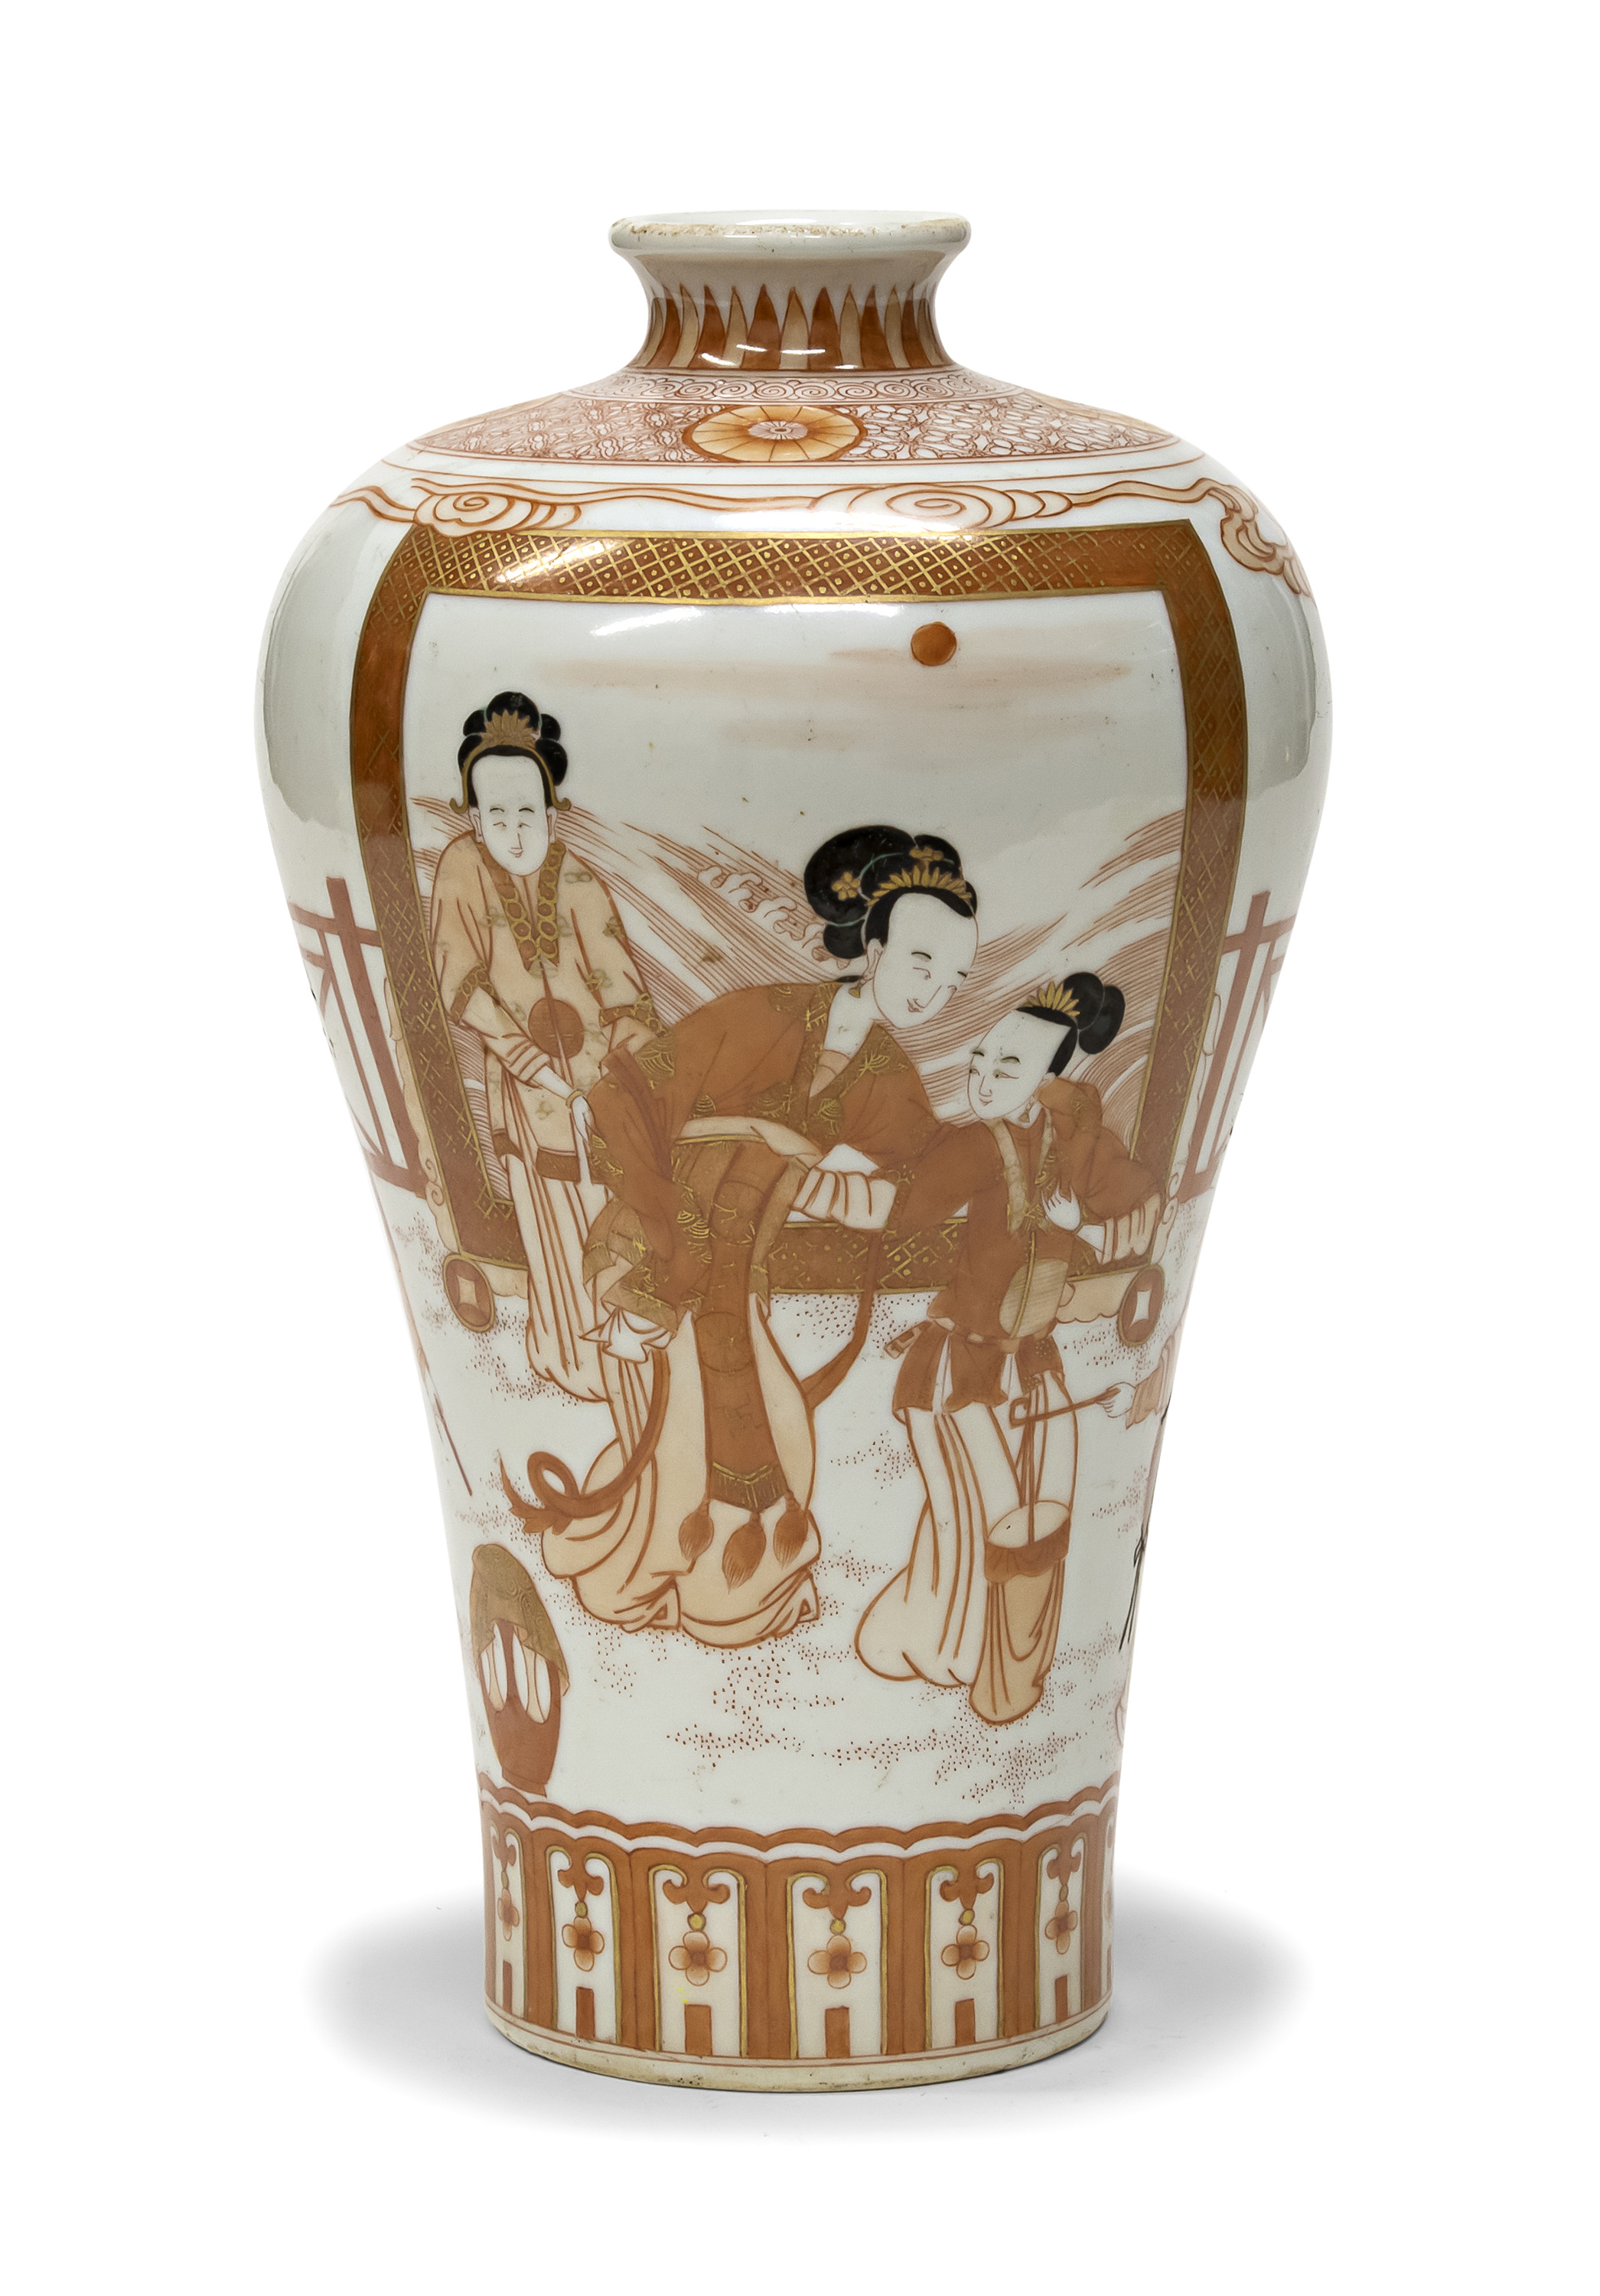 A CHINESE PORCELAIN VASE. 20TH CENTURY.